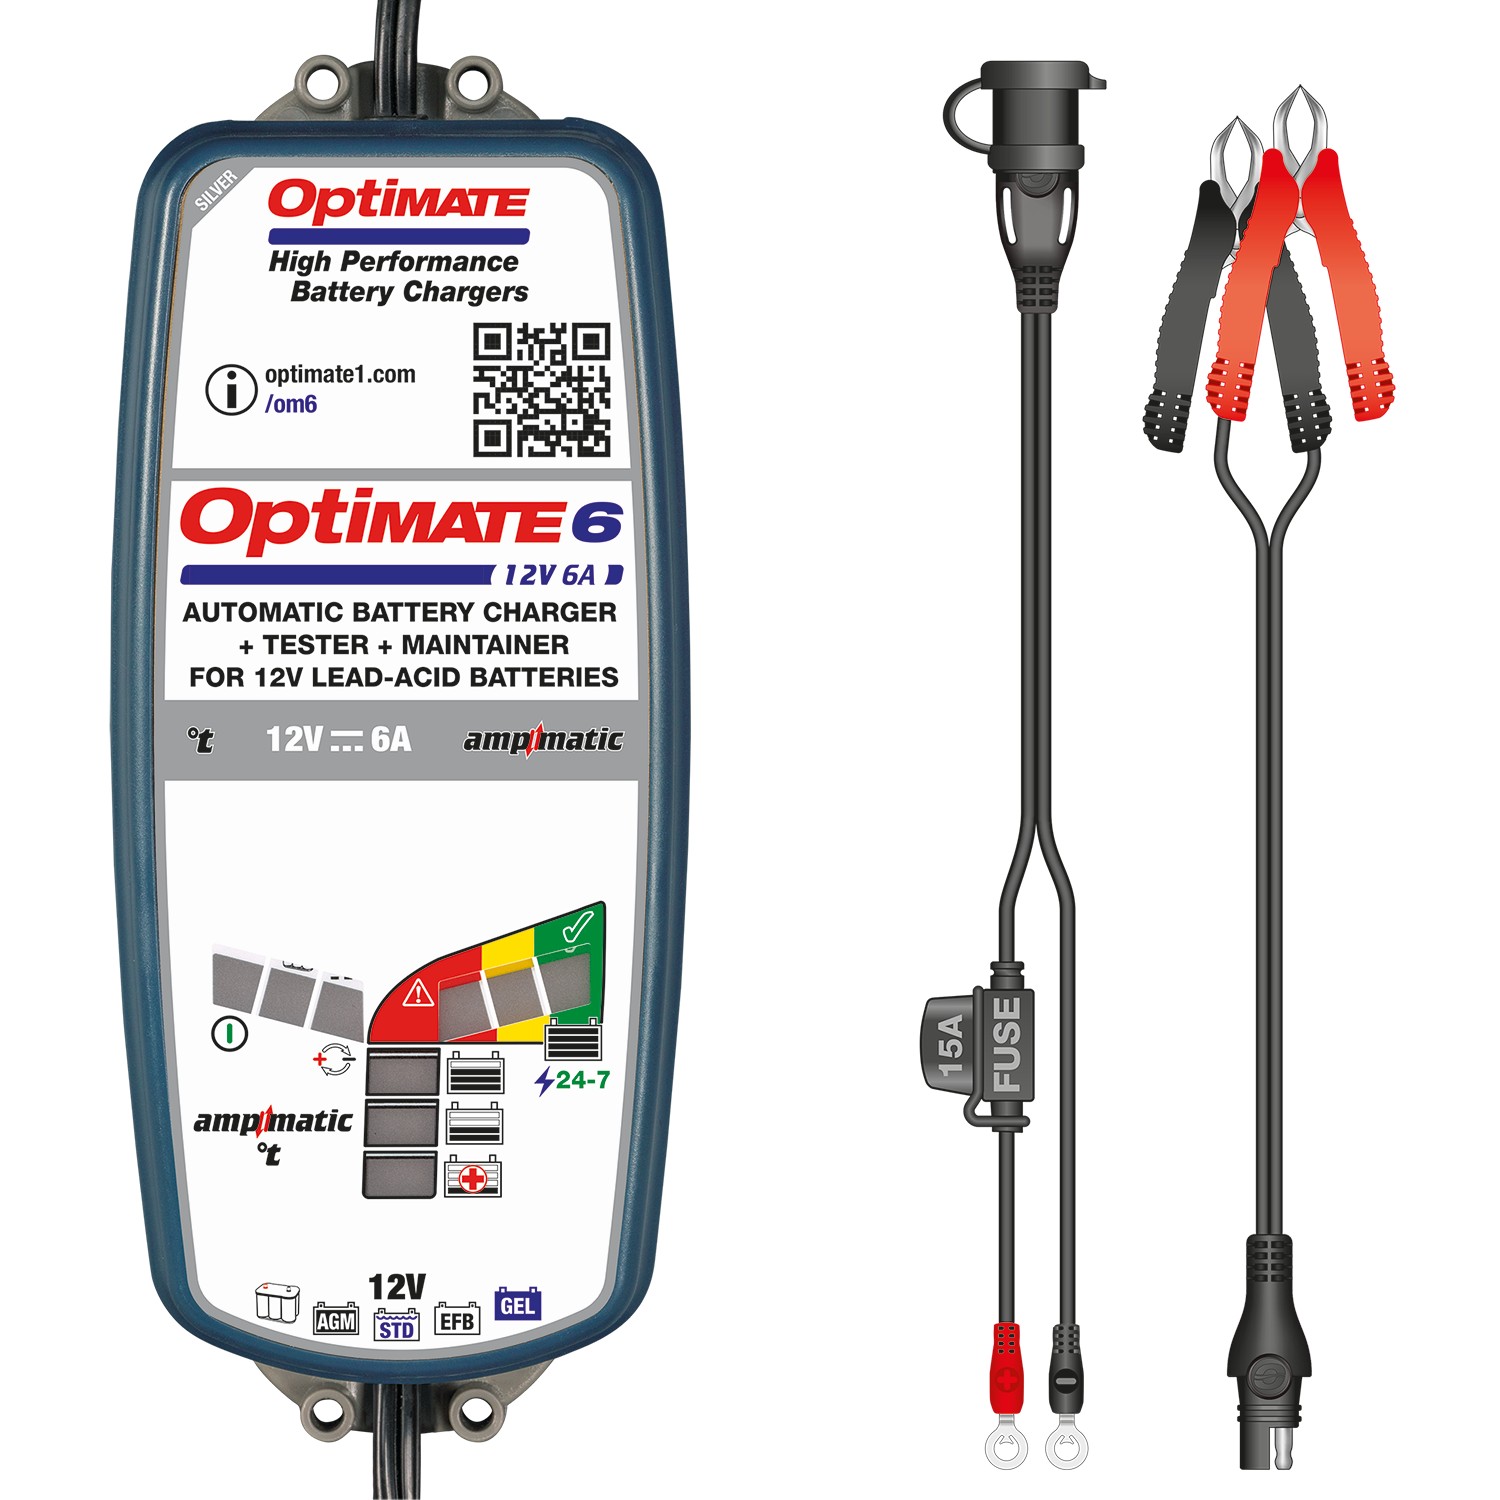 Milenco Optimate 6-12 Volt Leisure Battery Charger Fully Automatic 